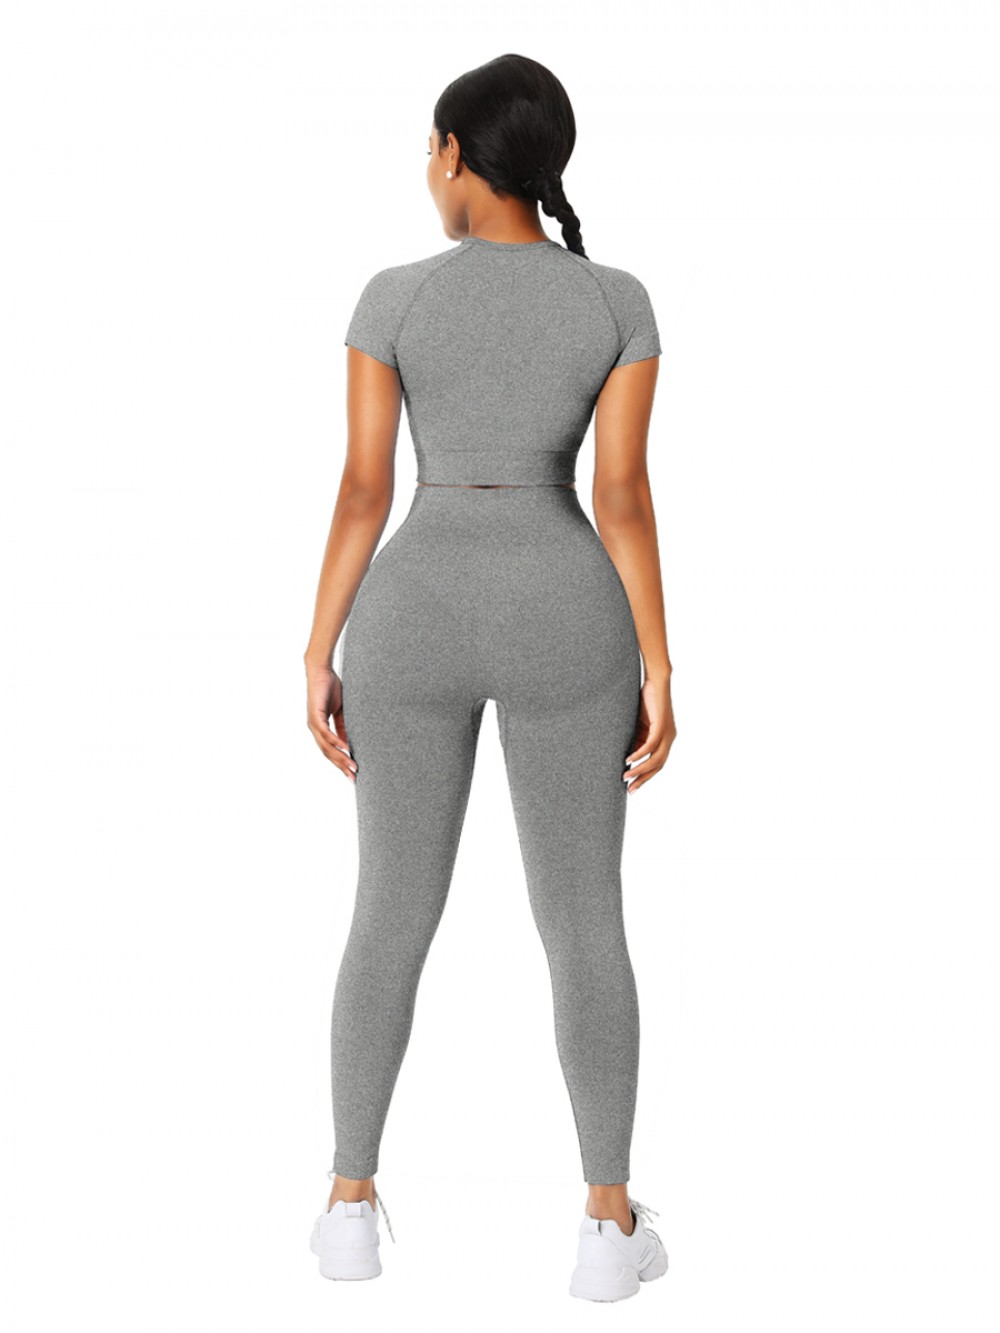 Cozy Gray Solid Color Sports Top Seamless Legging Exercise